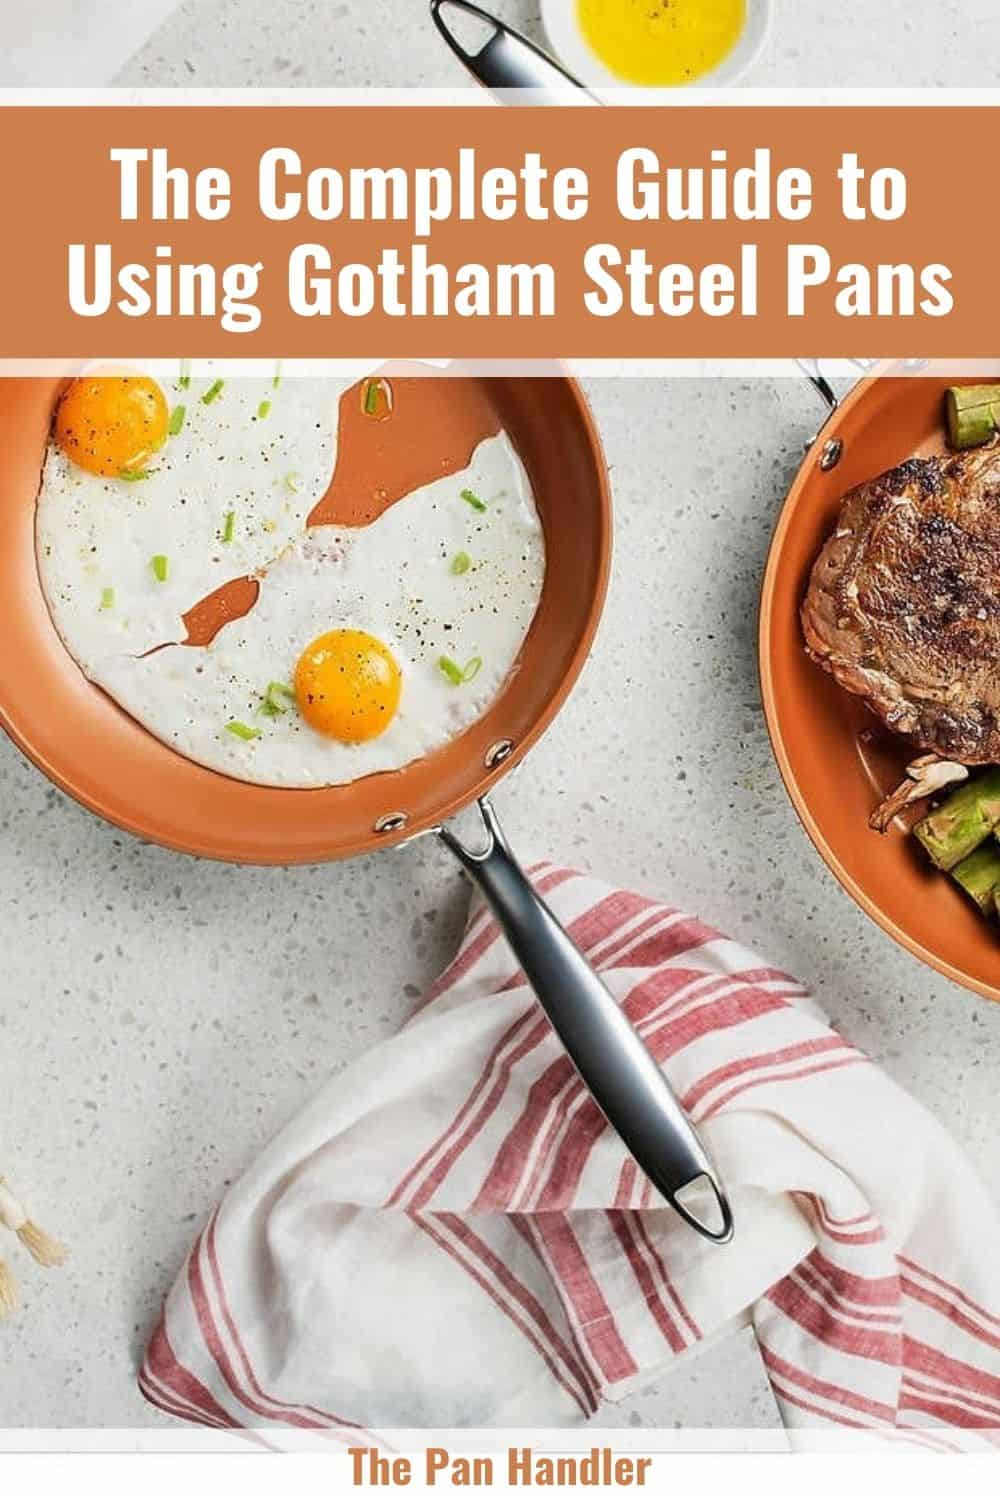 The Complete Guide to Using Gotham Steel Pans